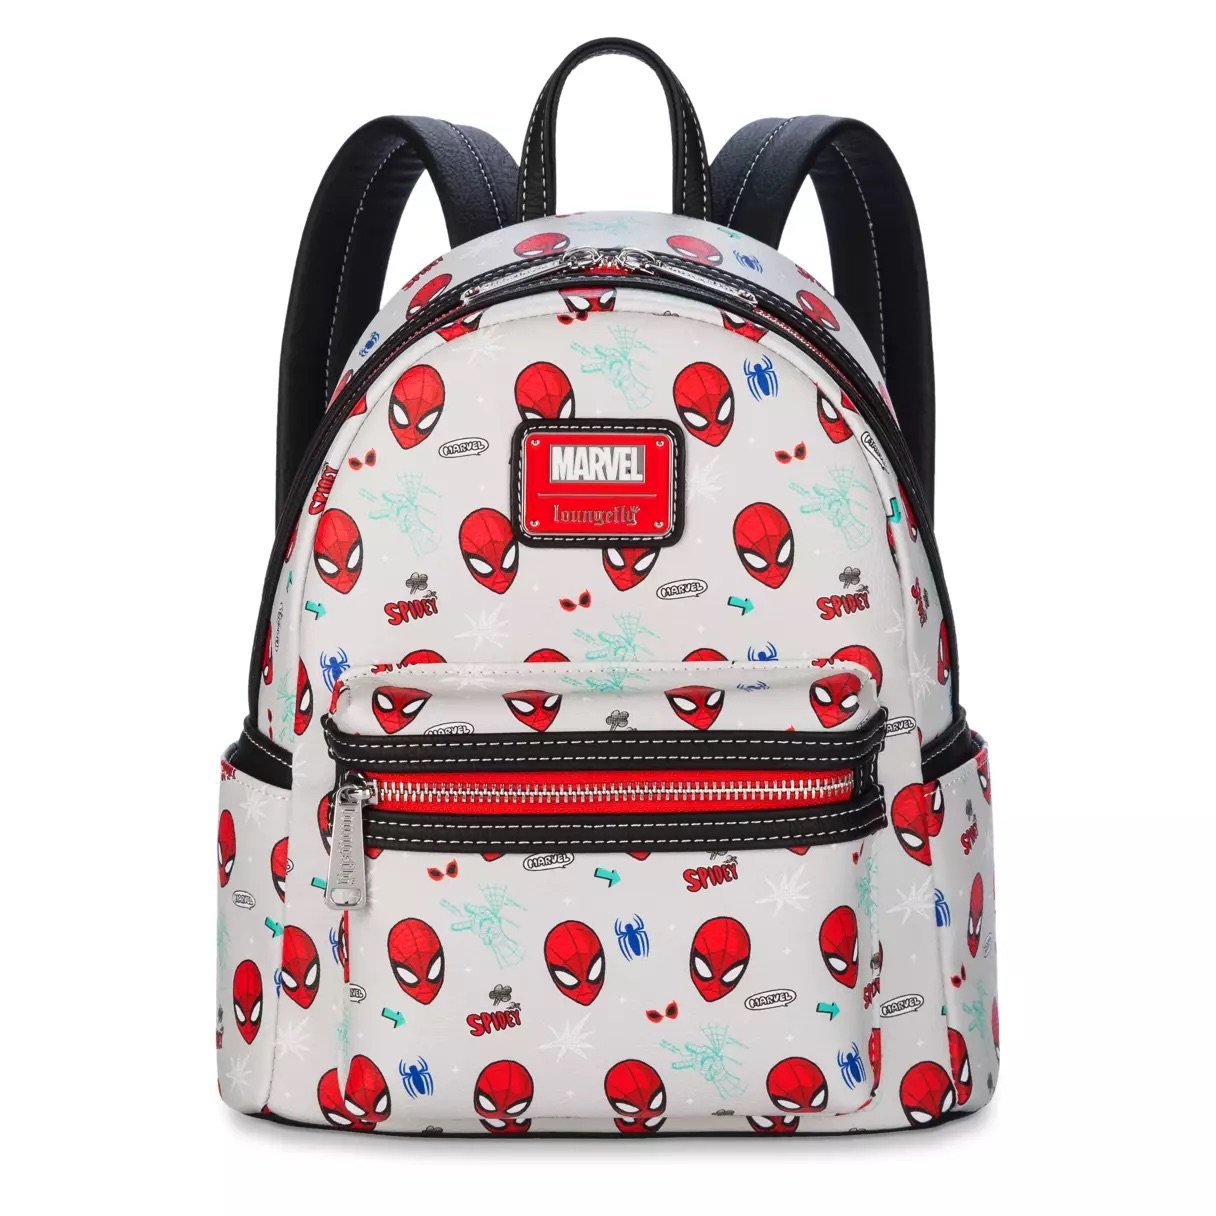 Spider-Man Loungefly Mini Backpack